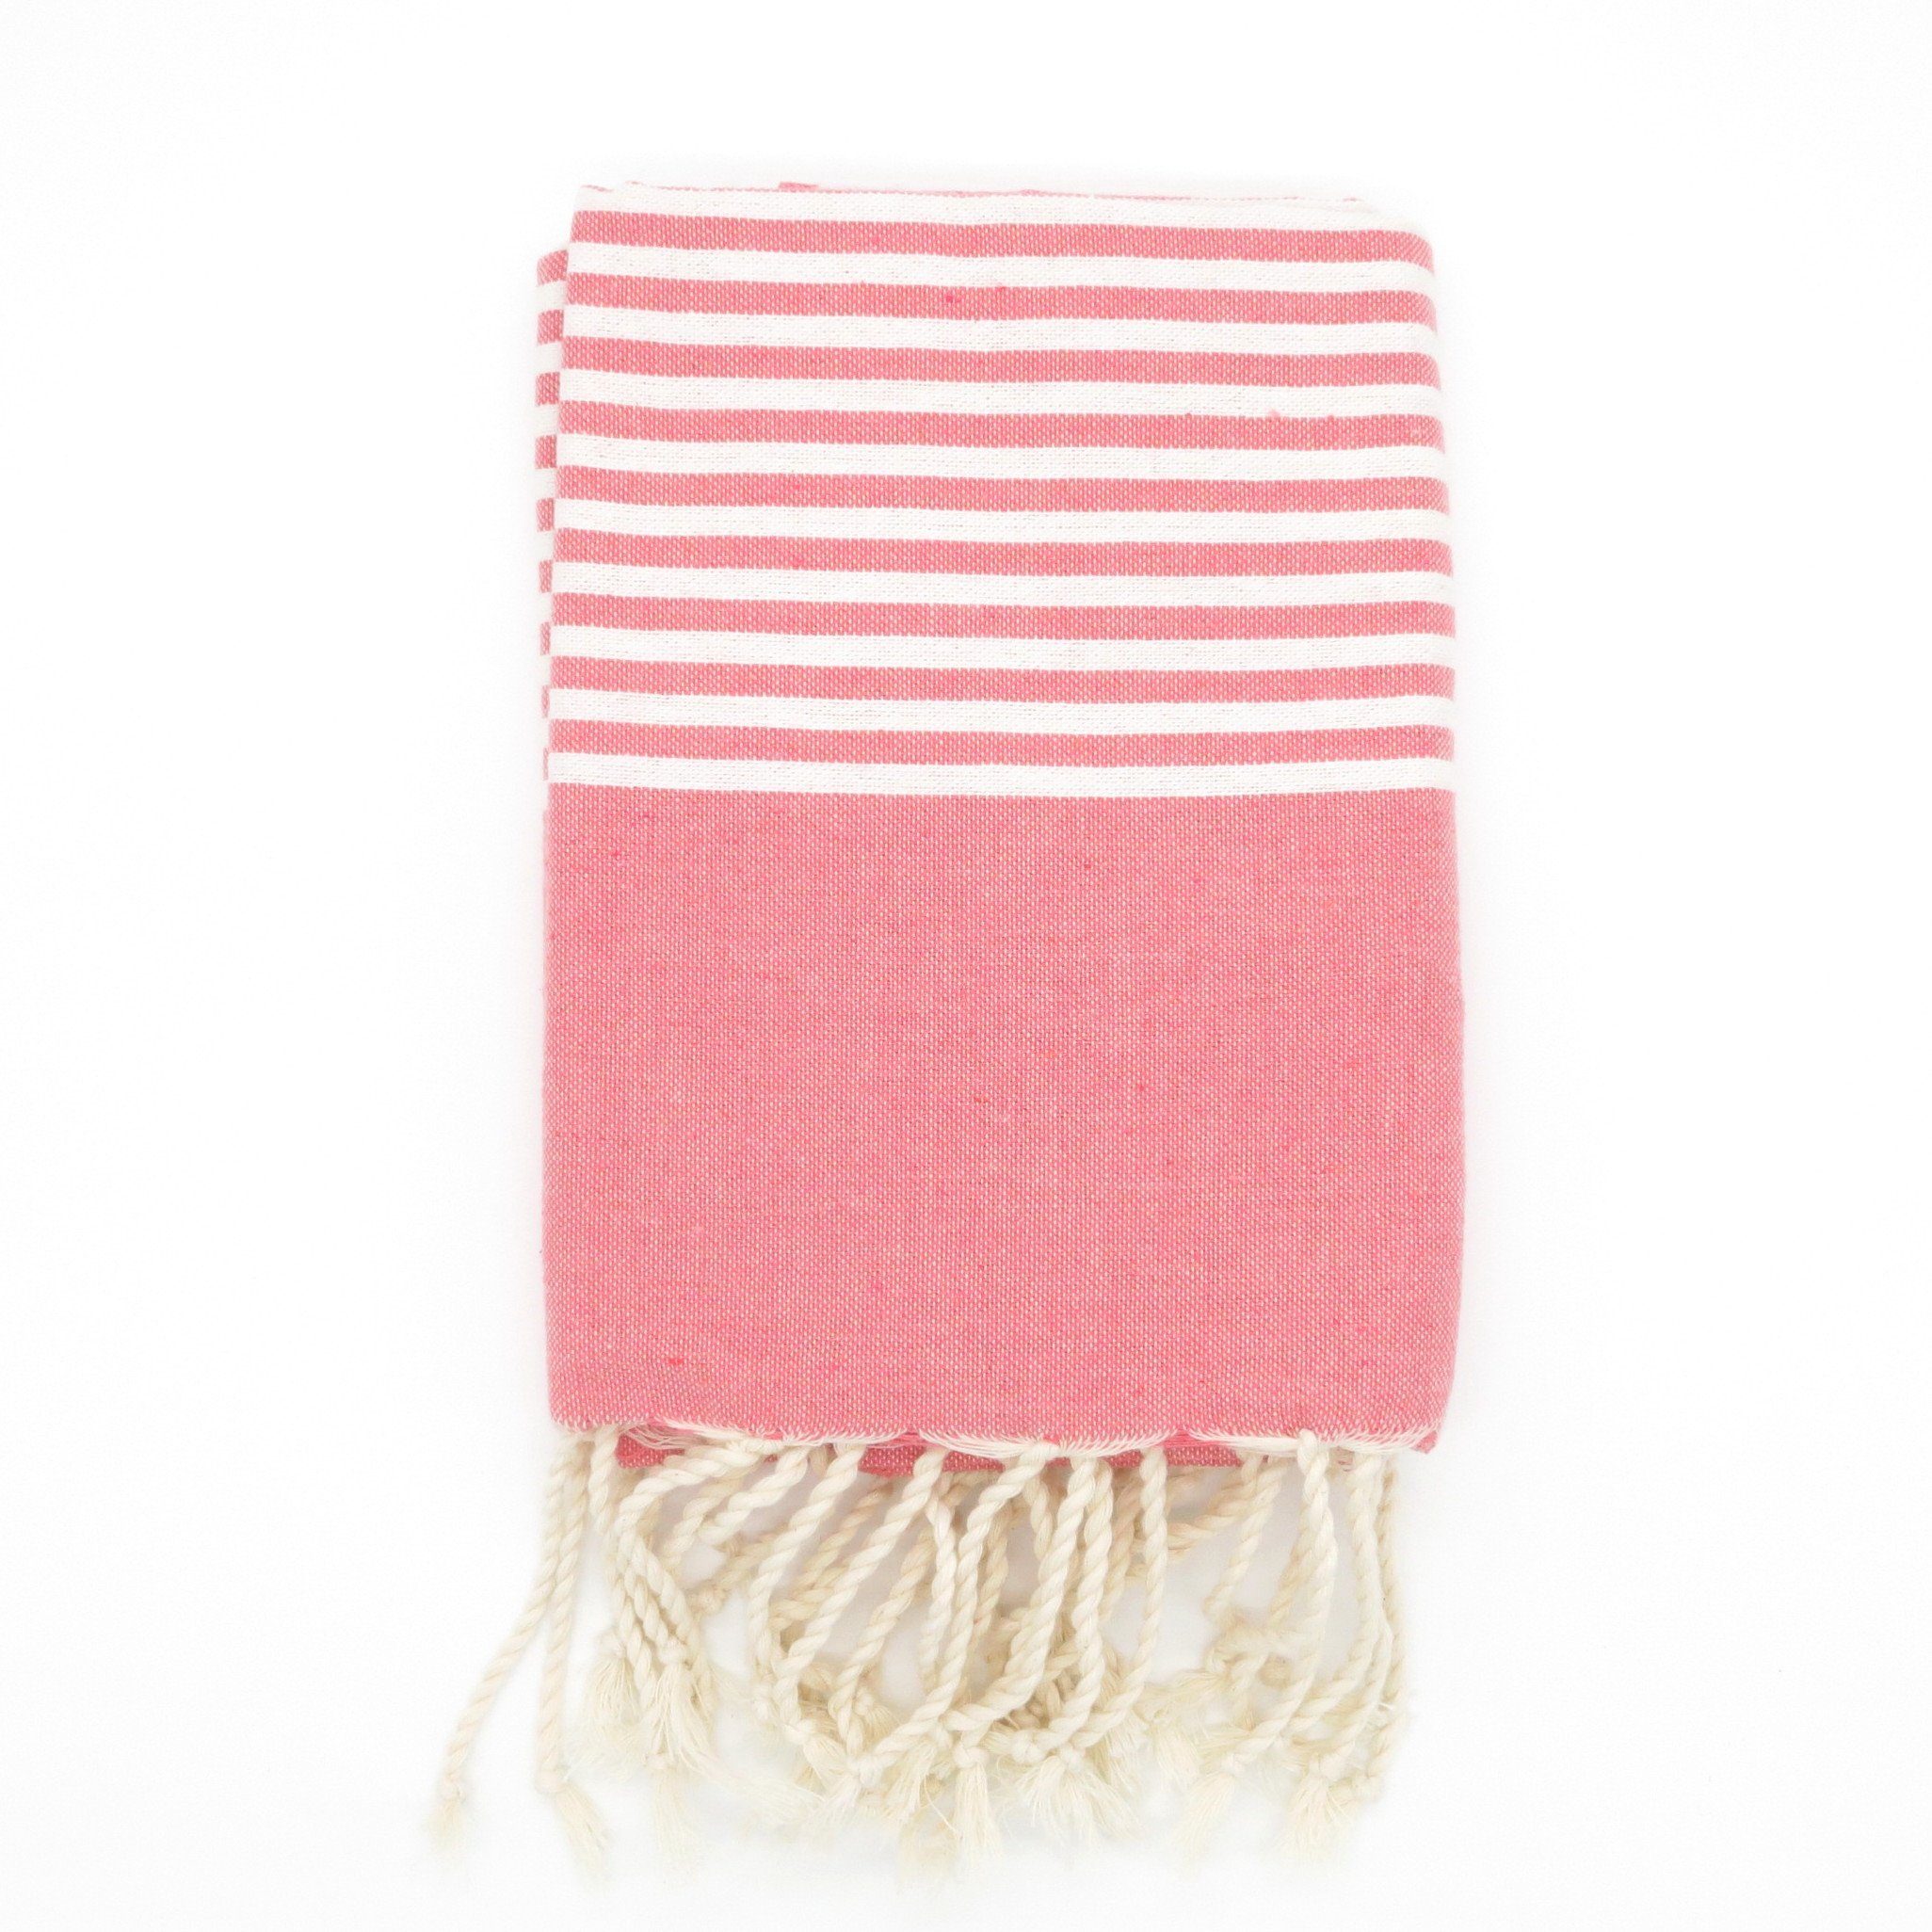 Cotonway Hamamtuch Fouta Fala, Baumwolle Koralle 100% recycling